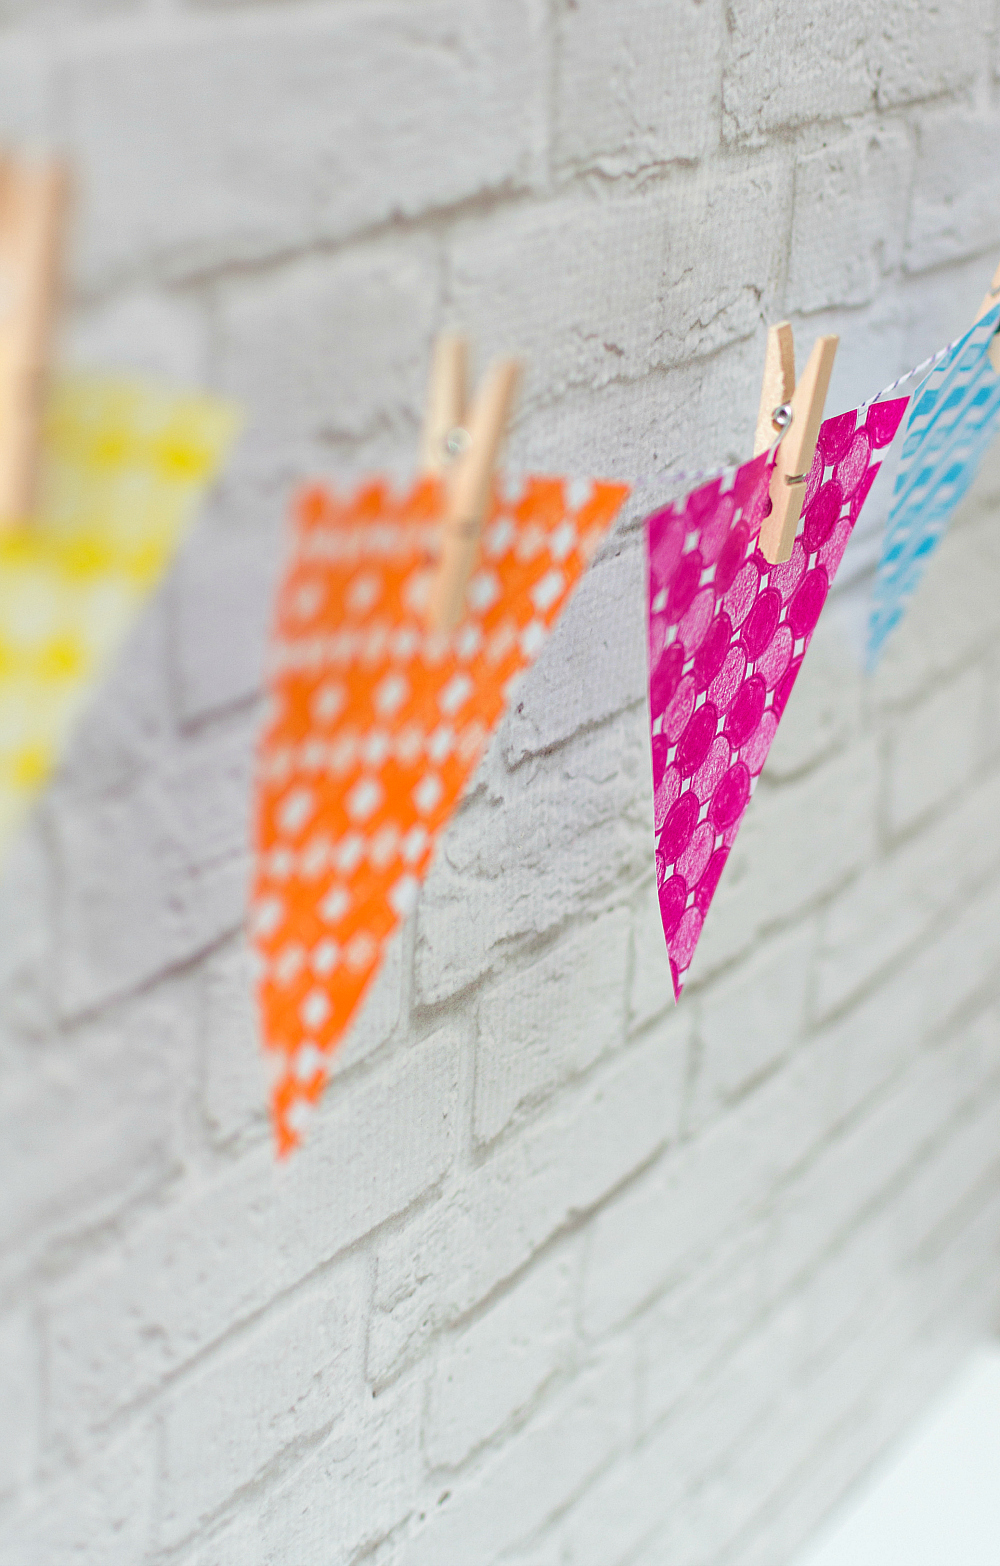 How To Make Paper Banner: Easy DIY Tutorial Using Copier Paper and Colored Pencils